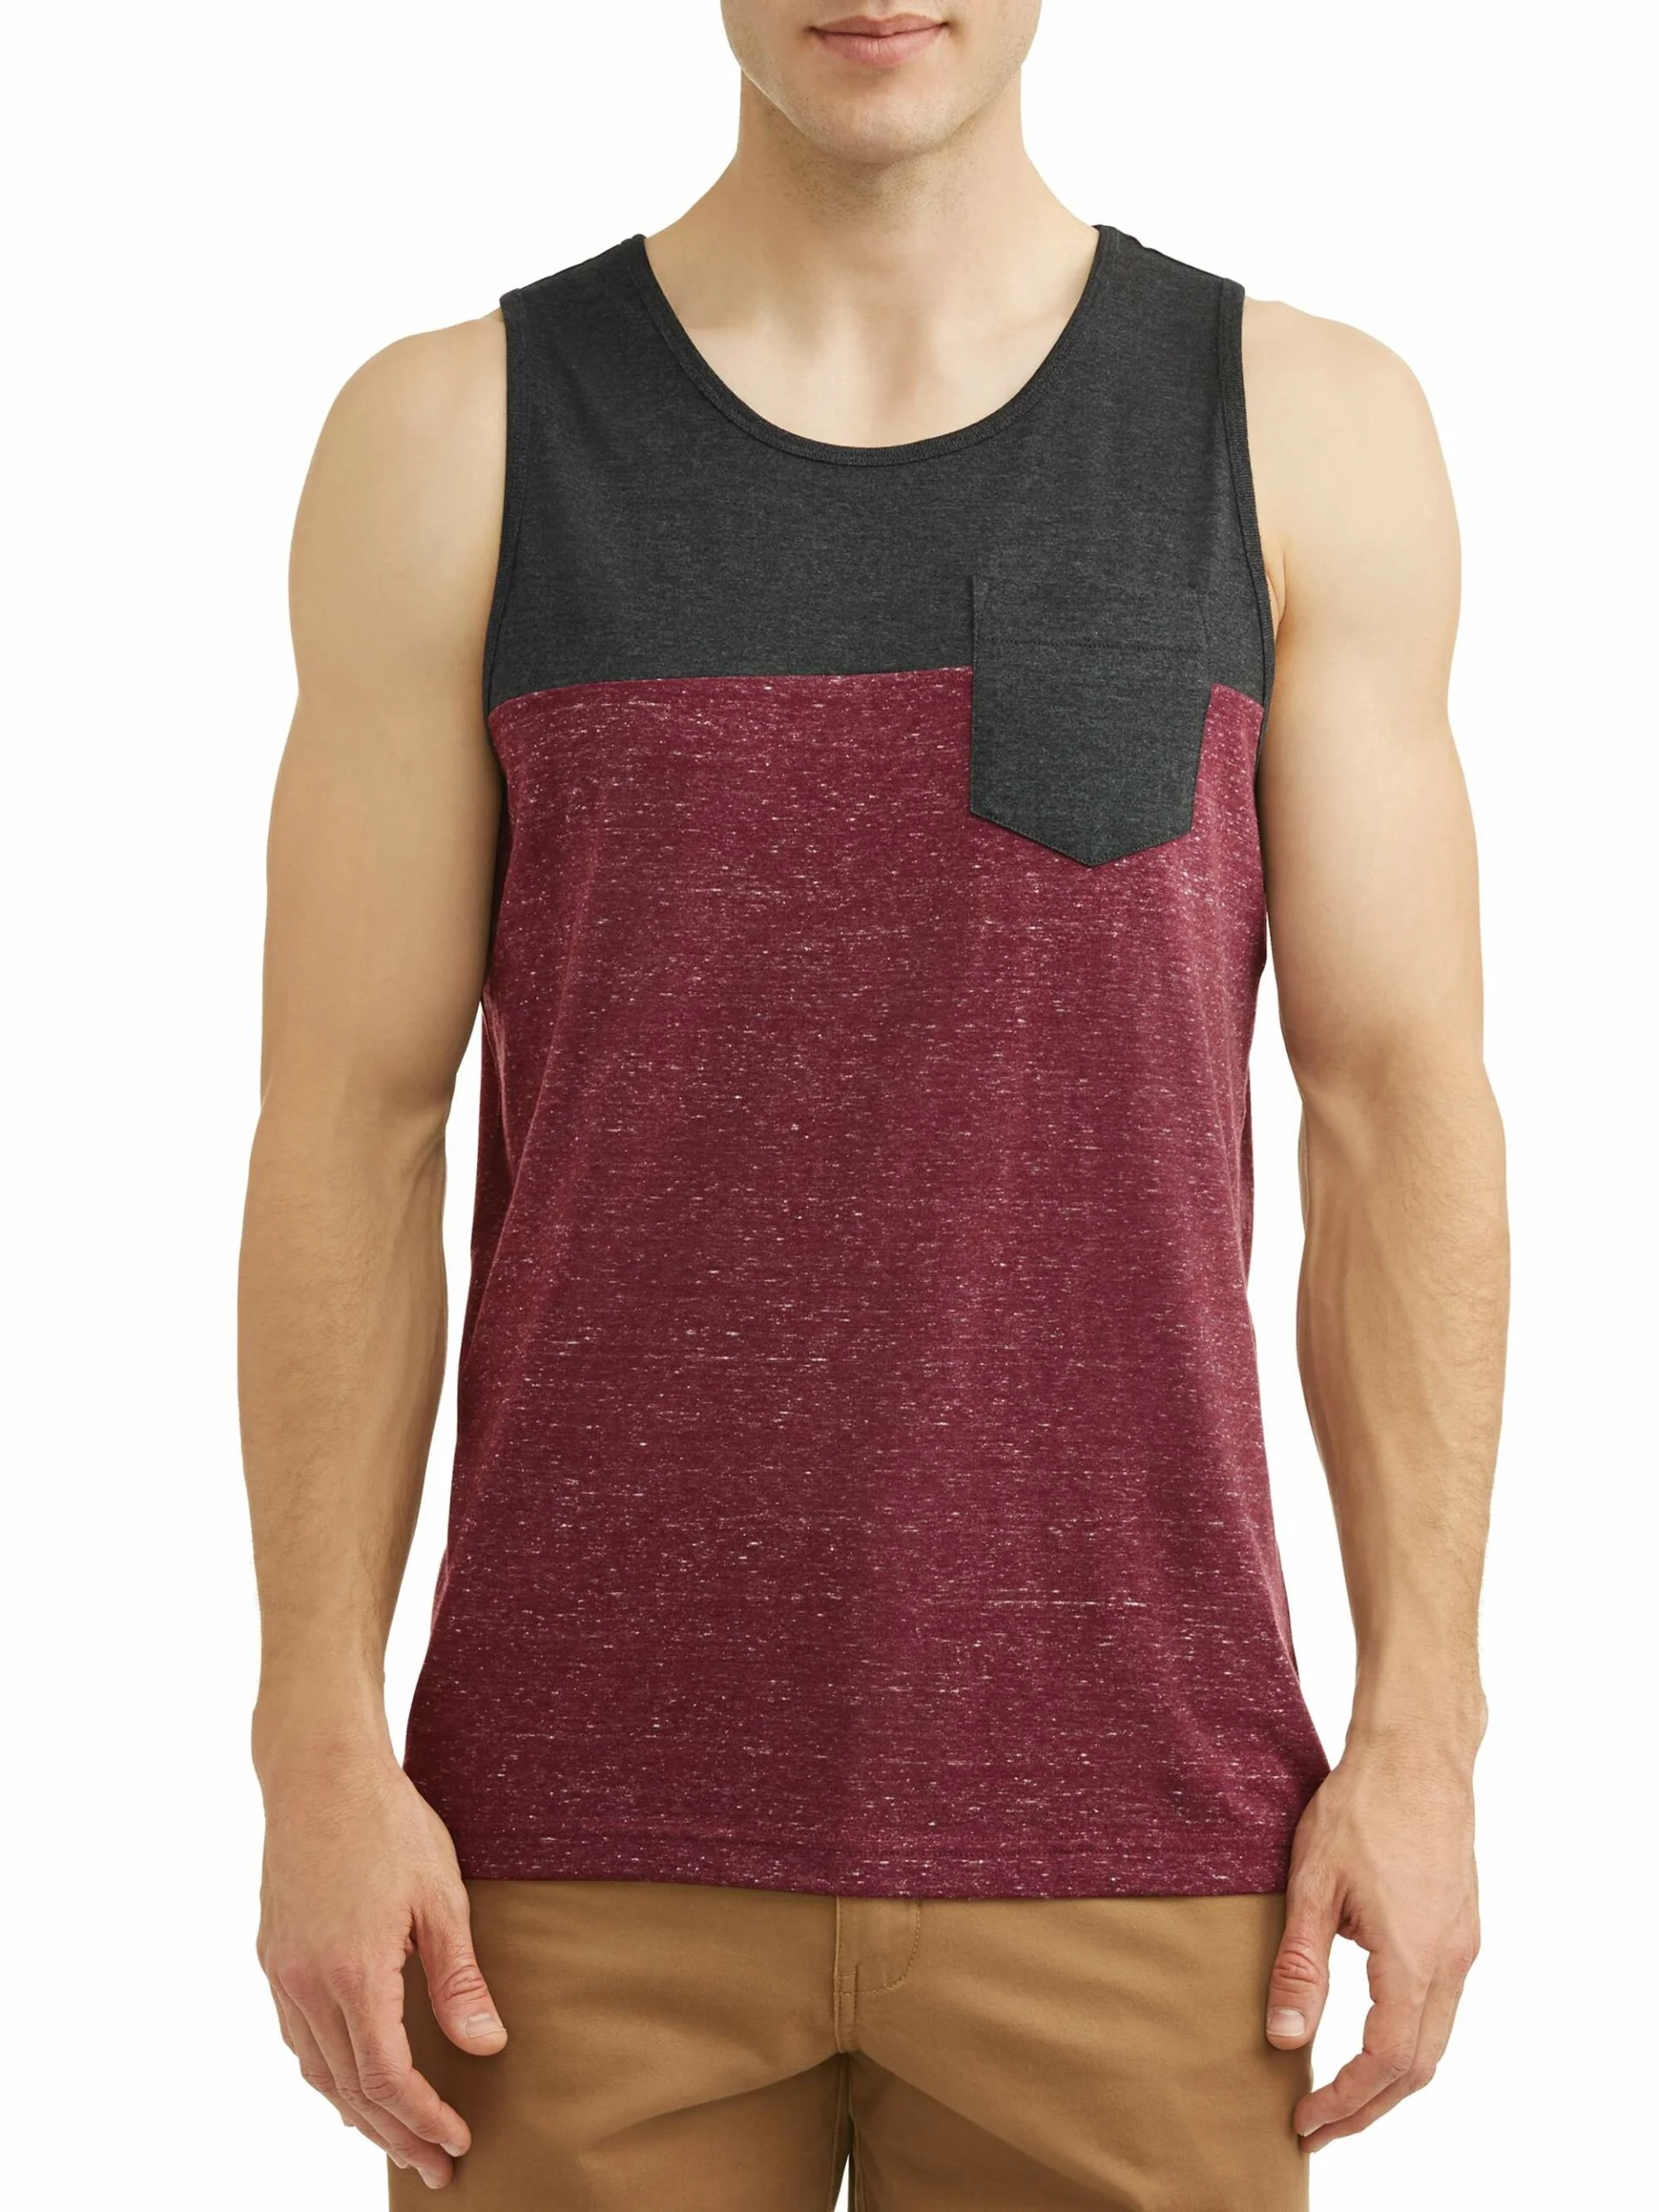 Tank Tops - Bangladesh Factory, Suppliers, Manufacturers